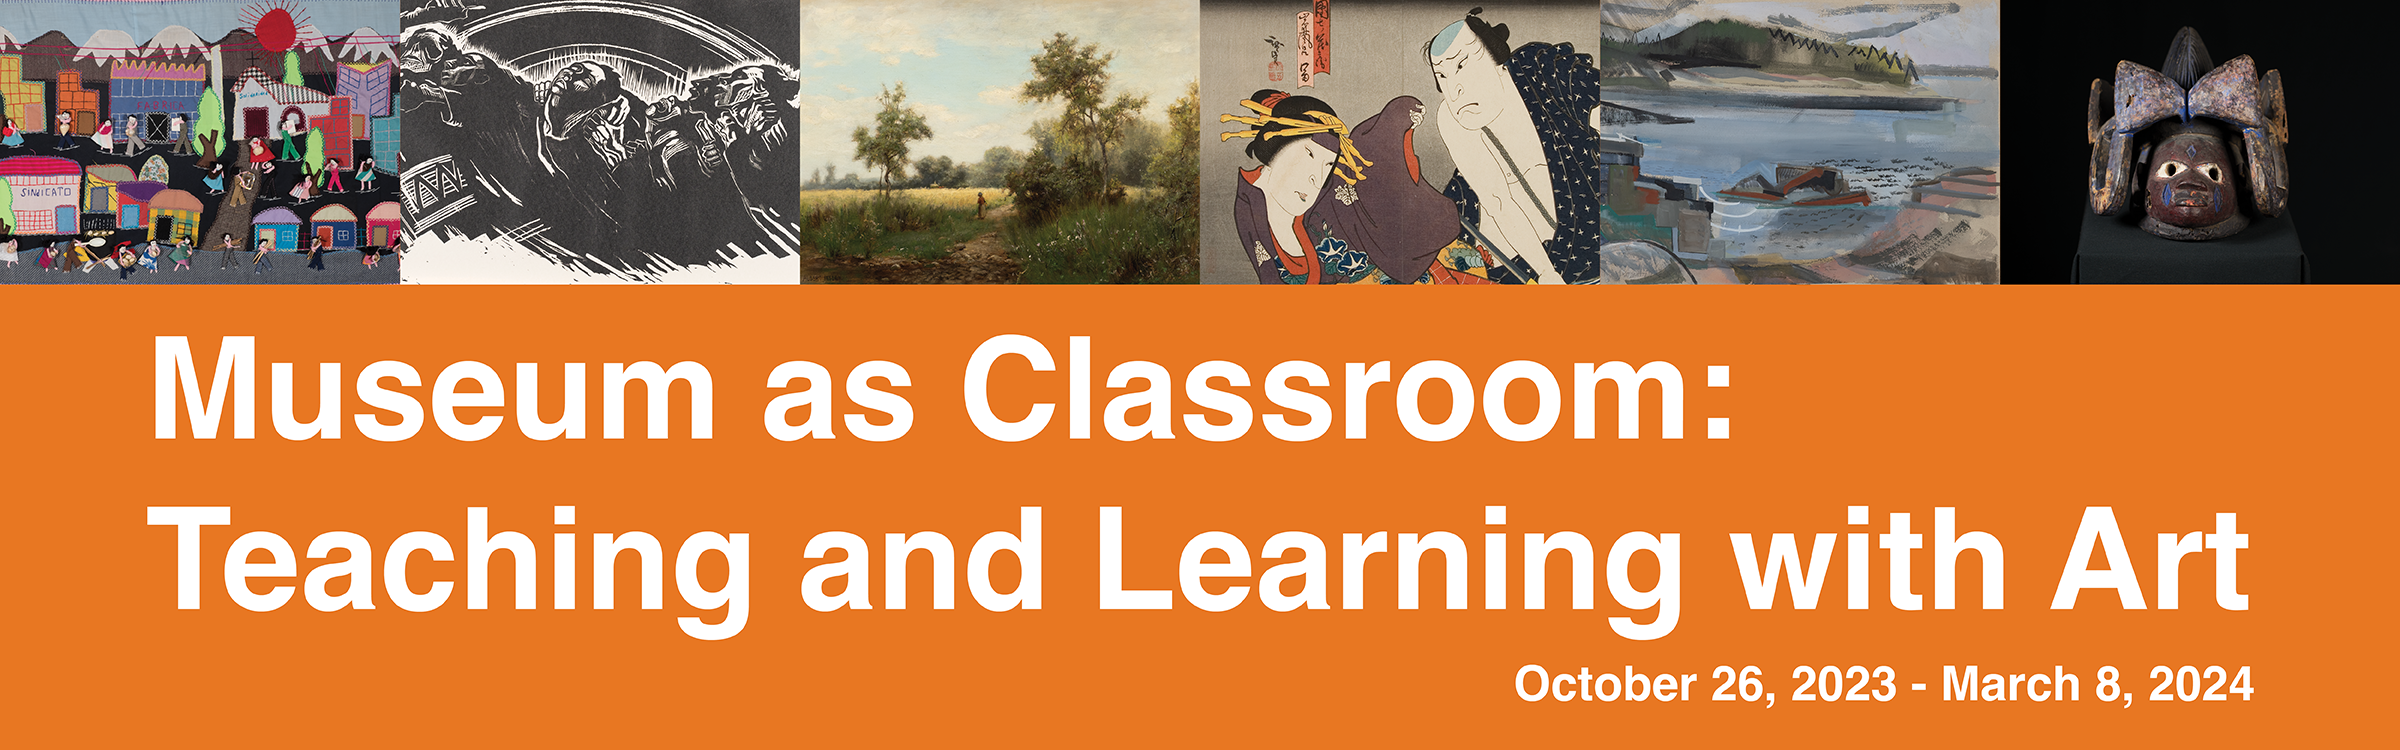 Museum as Classroom: Teaching and Learning with Art Website Banner